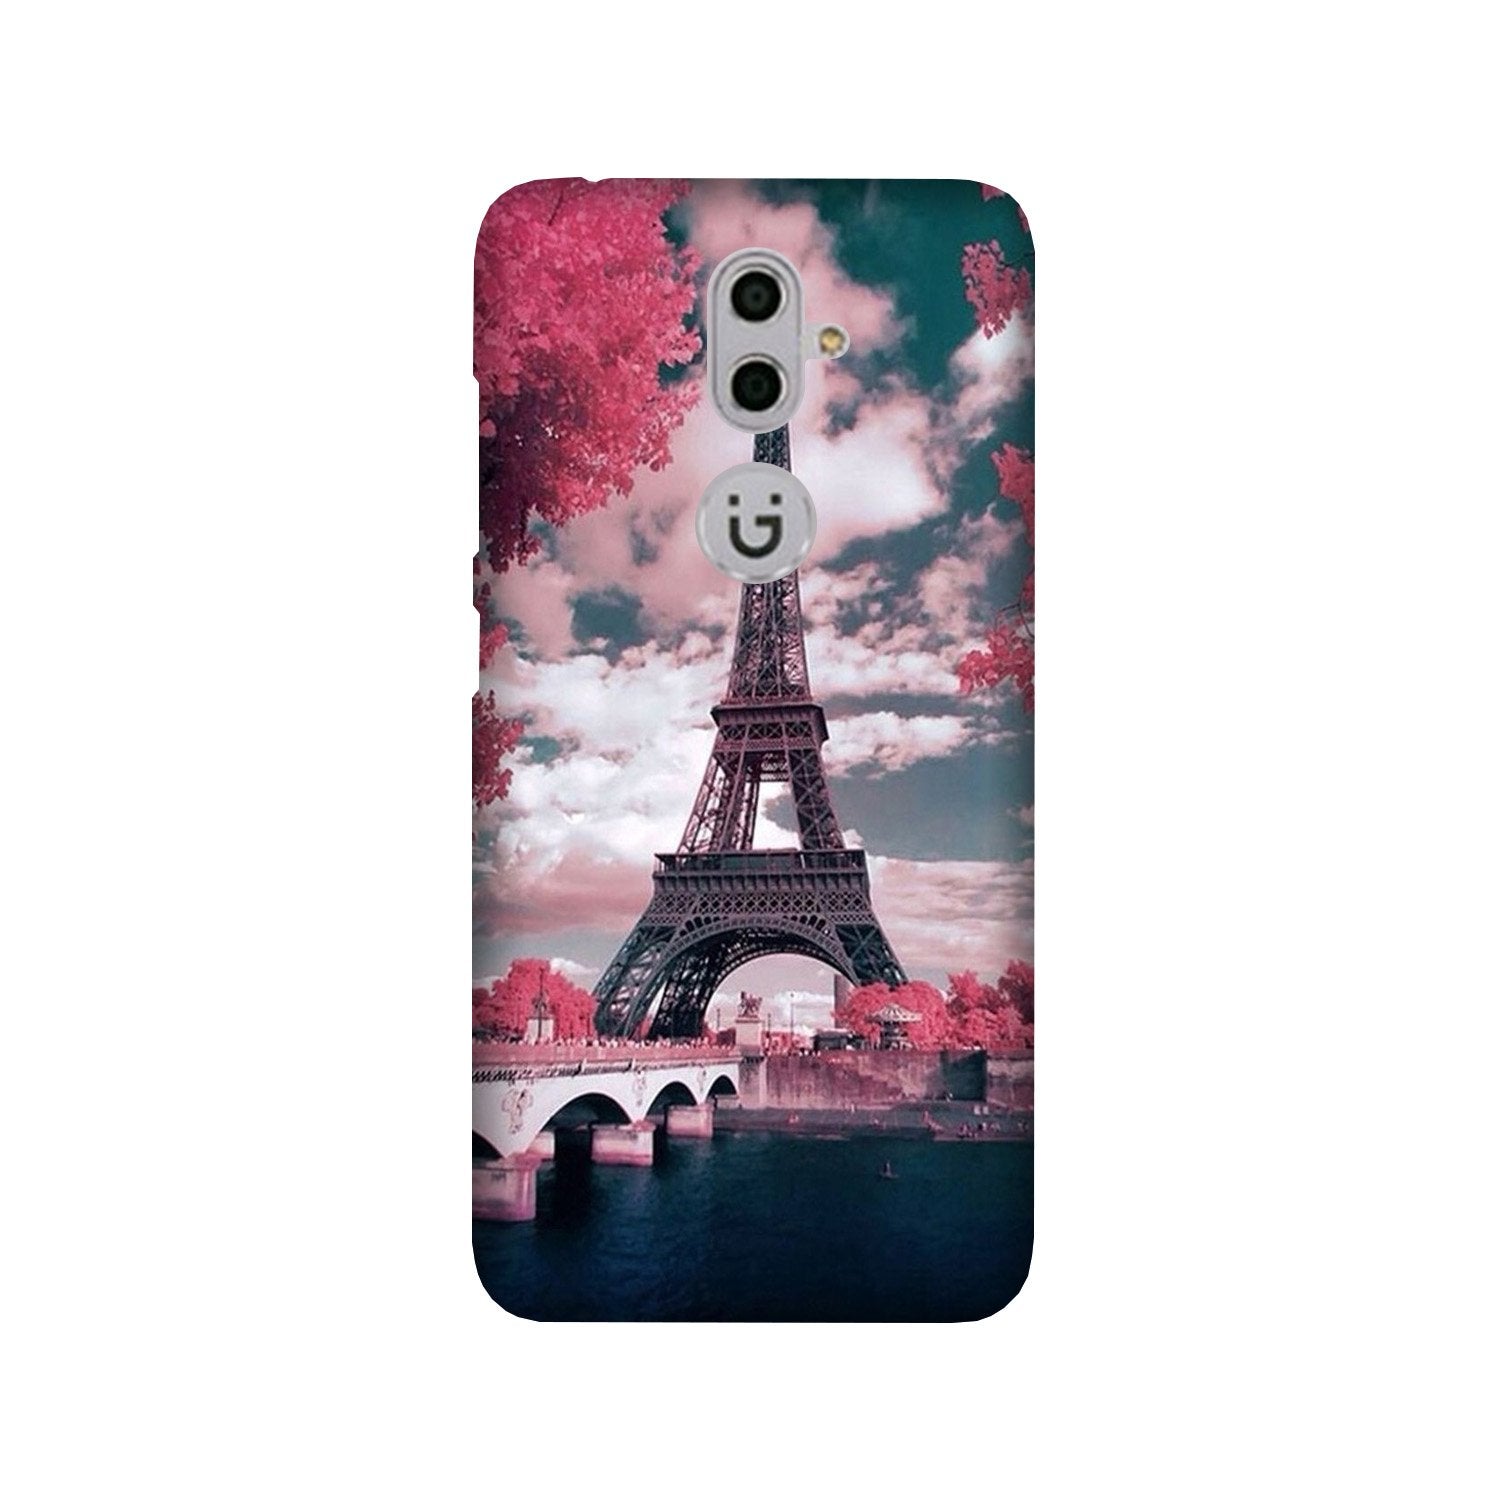 Eiffel Tower Case for Gionee S9(Design - 101)